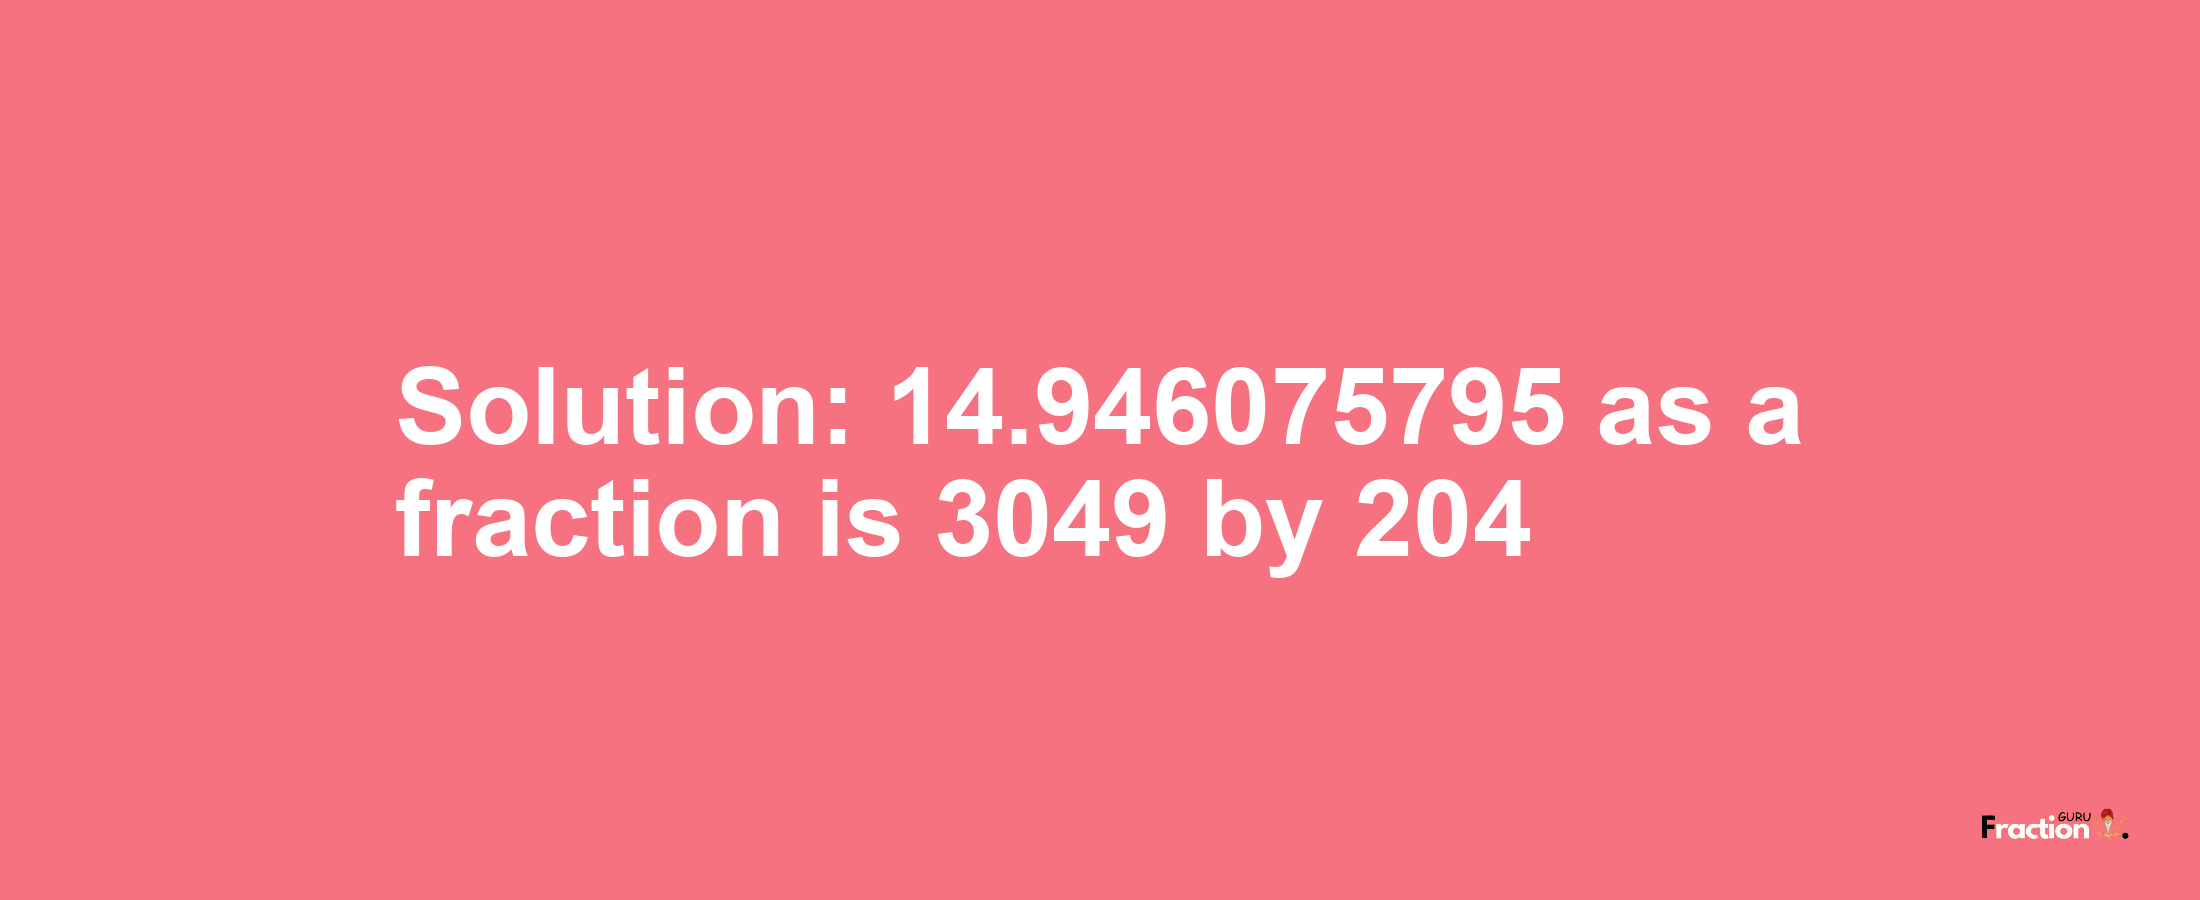 Solution:14.946075795 as a fraction is 3049/204